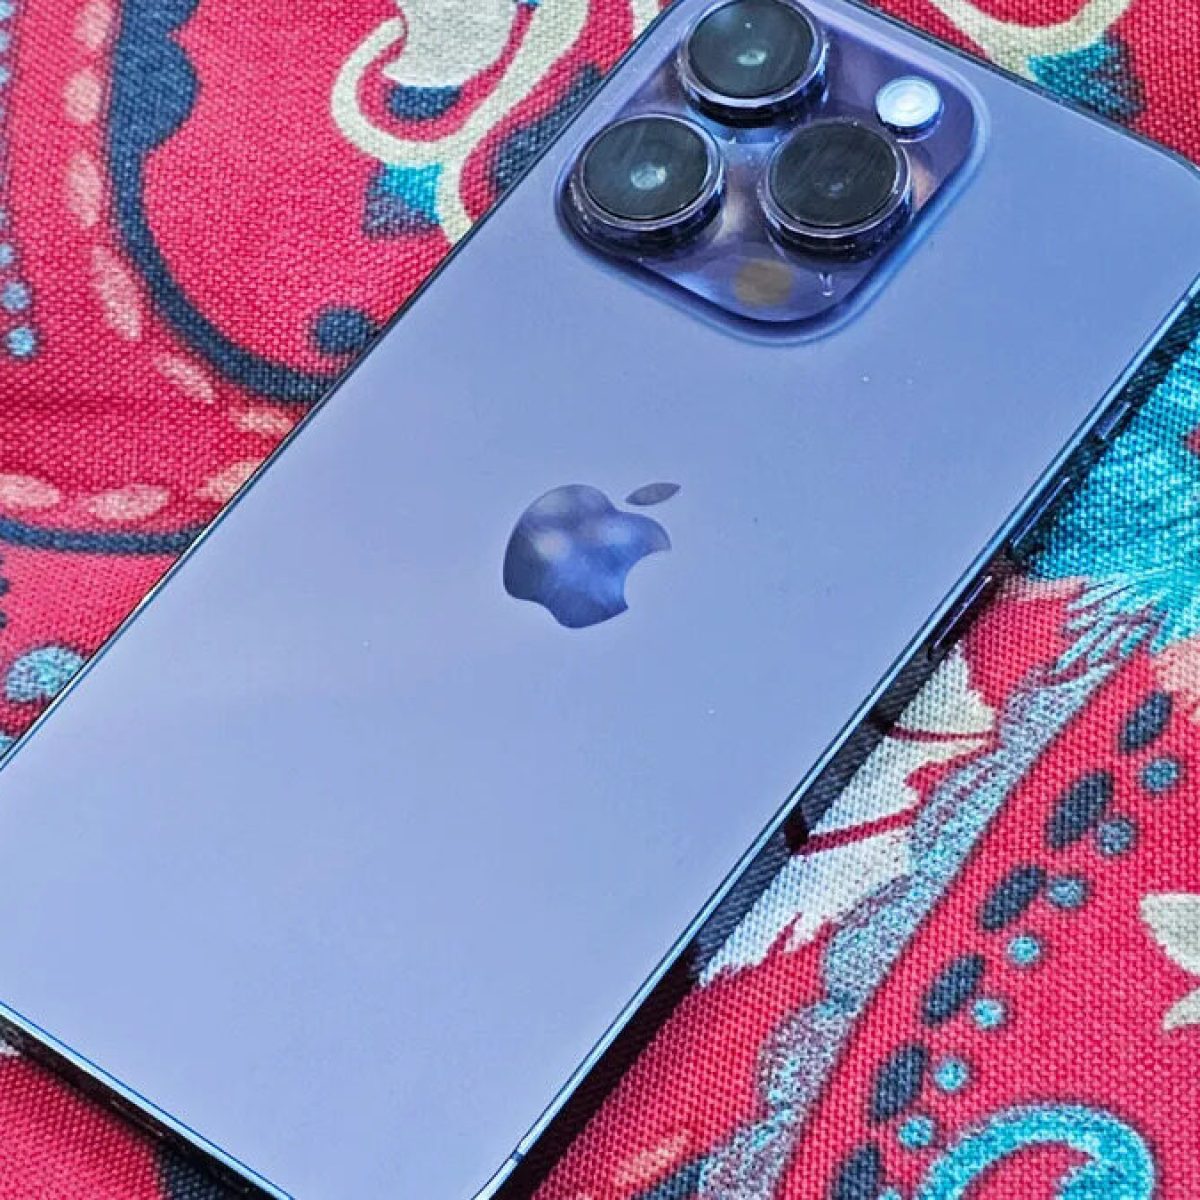 My iPhone 14 Pro is great, but one thing is driving me crazy